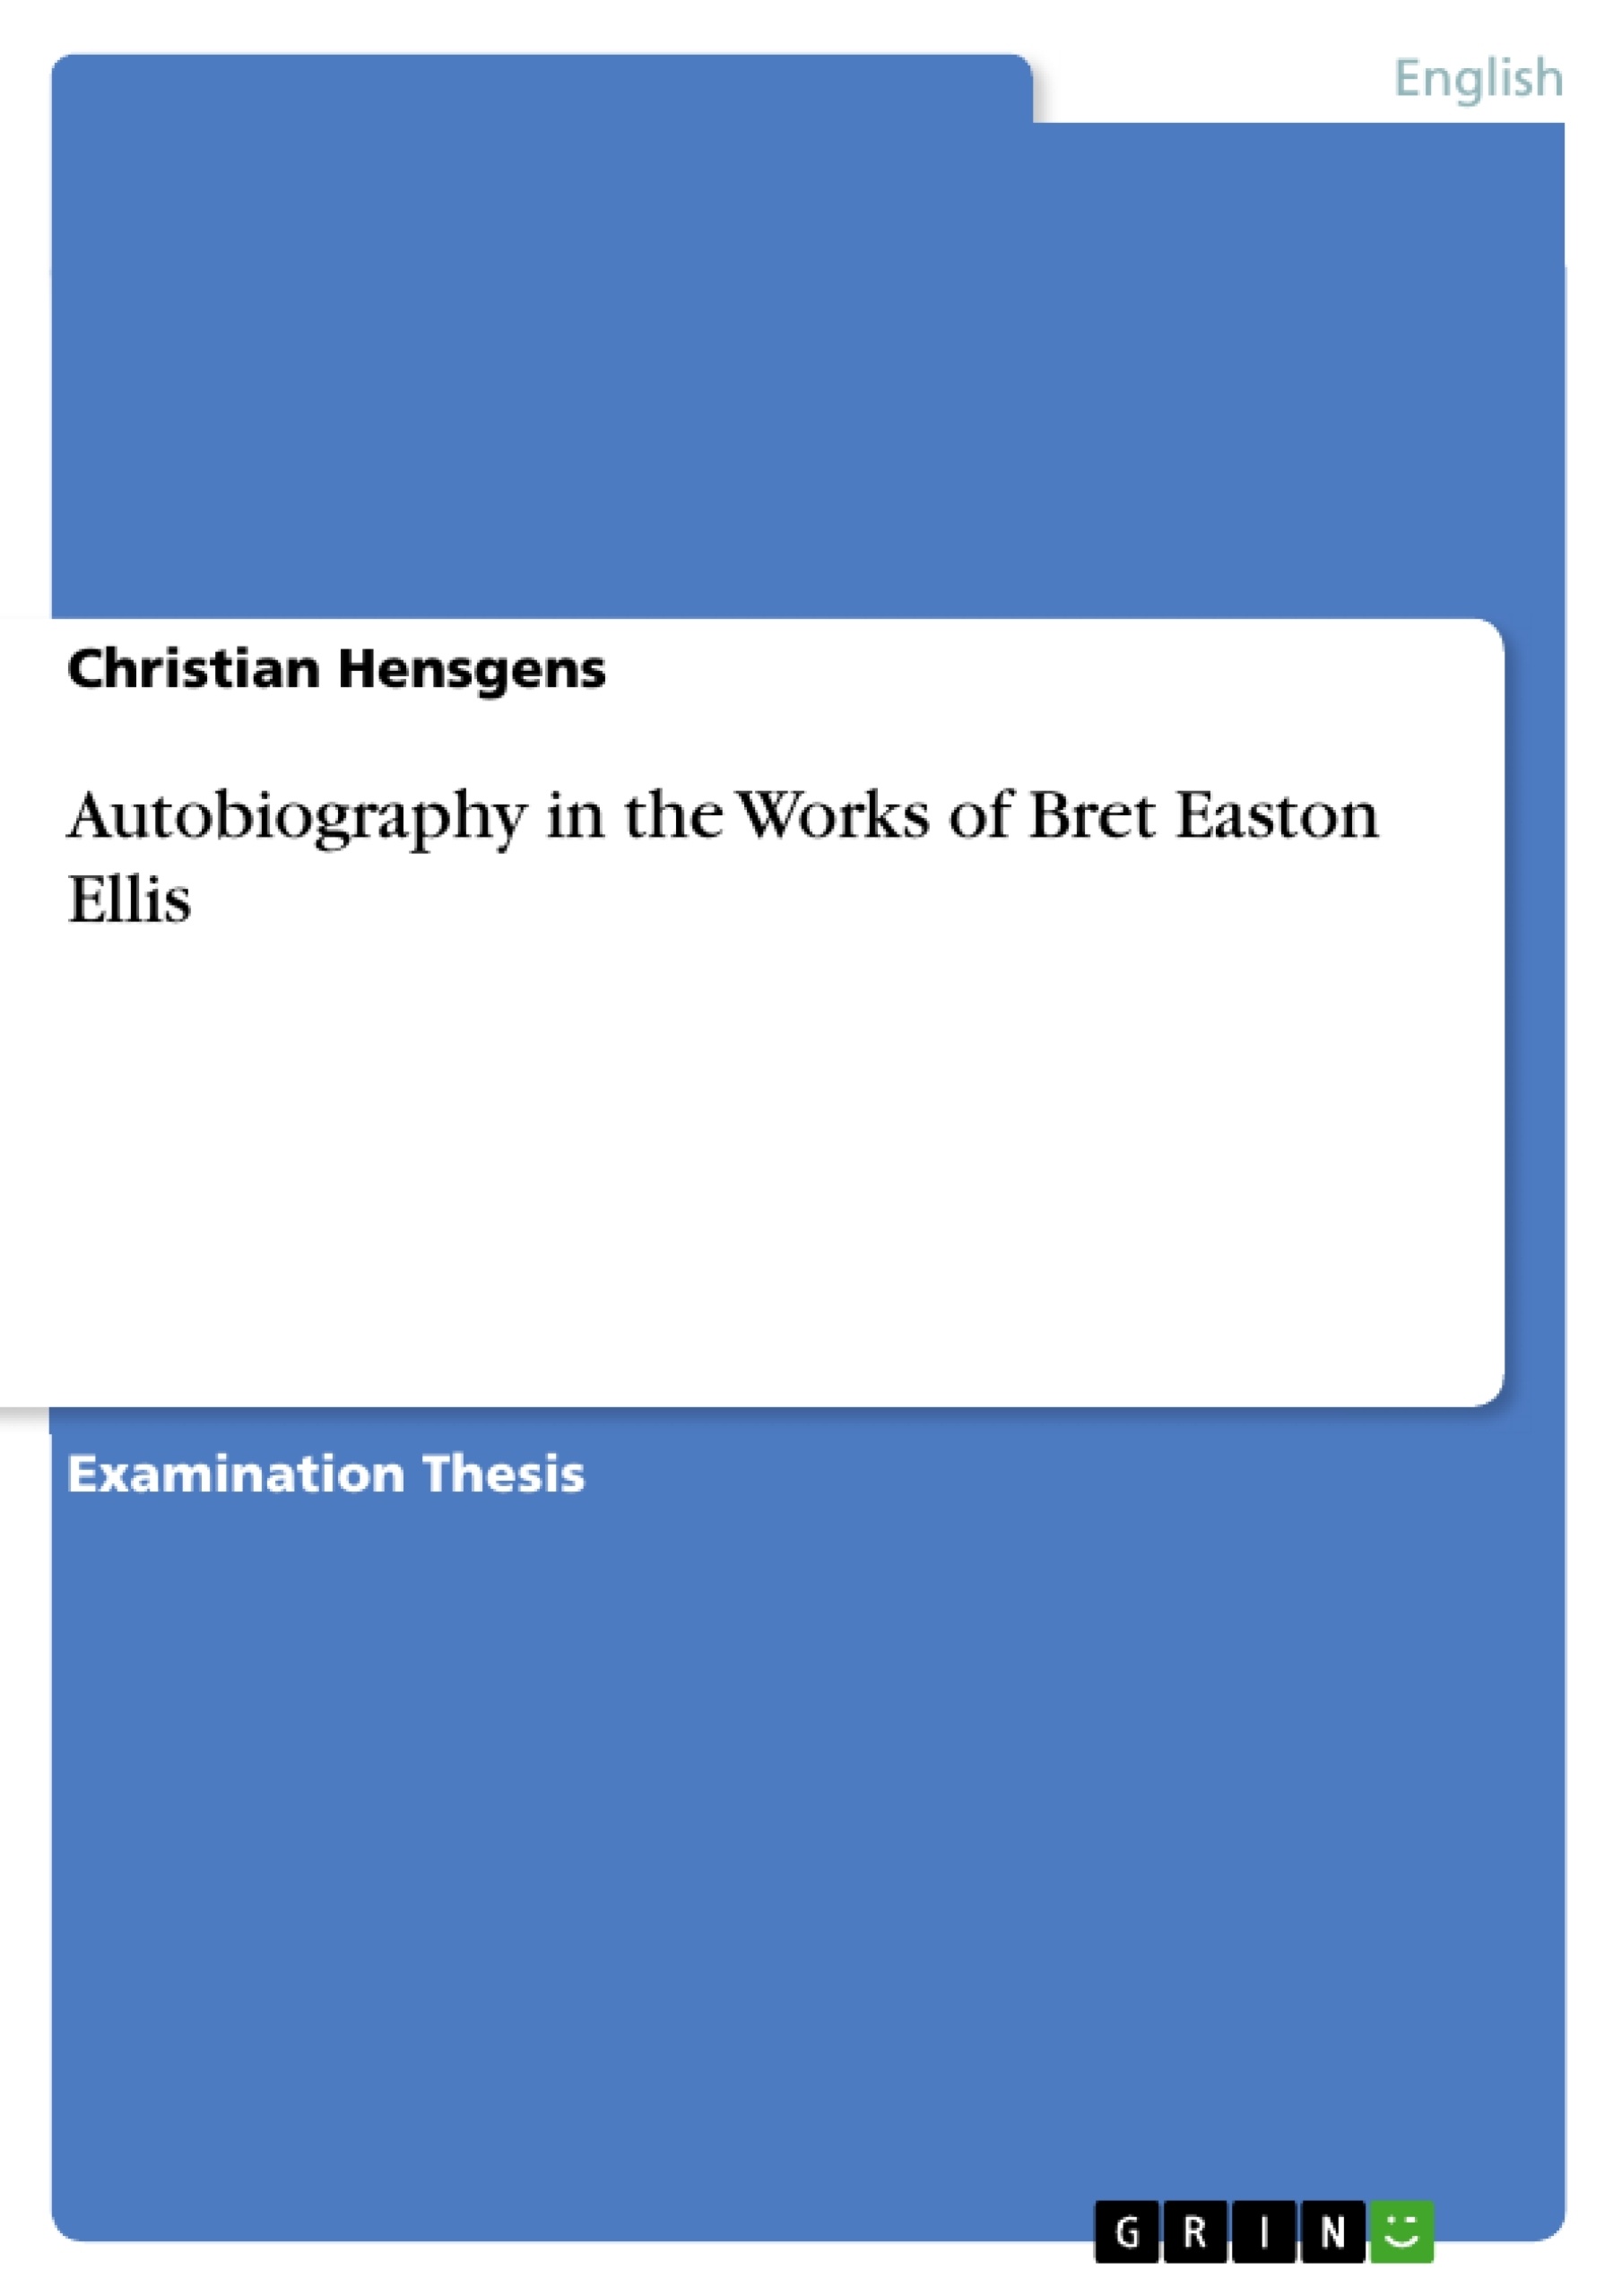 Title: Autobiography in the Works of Bret Easton Ellis